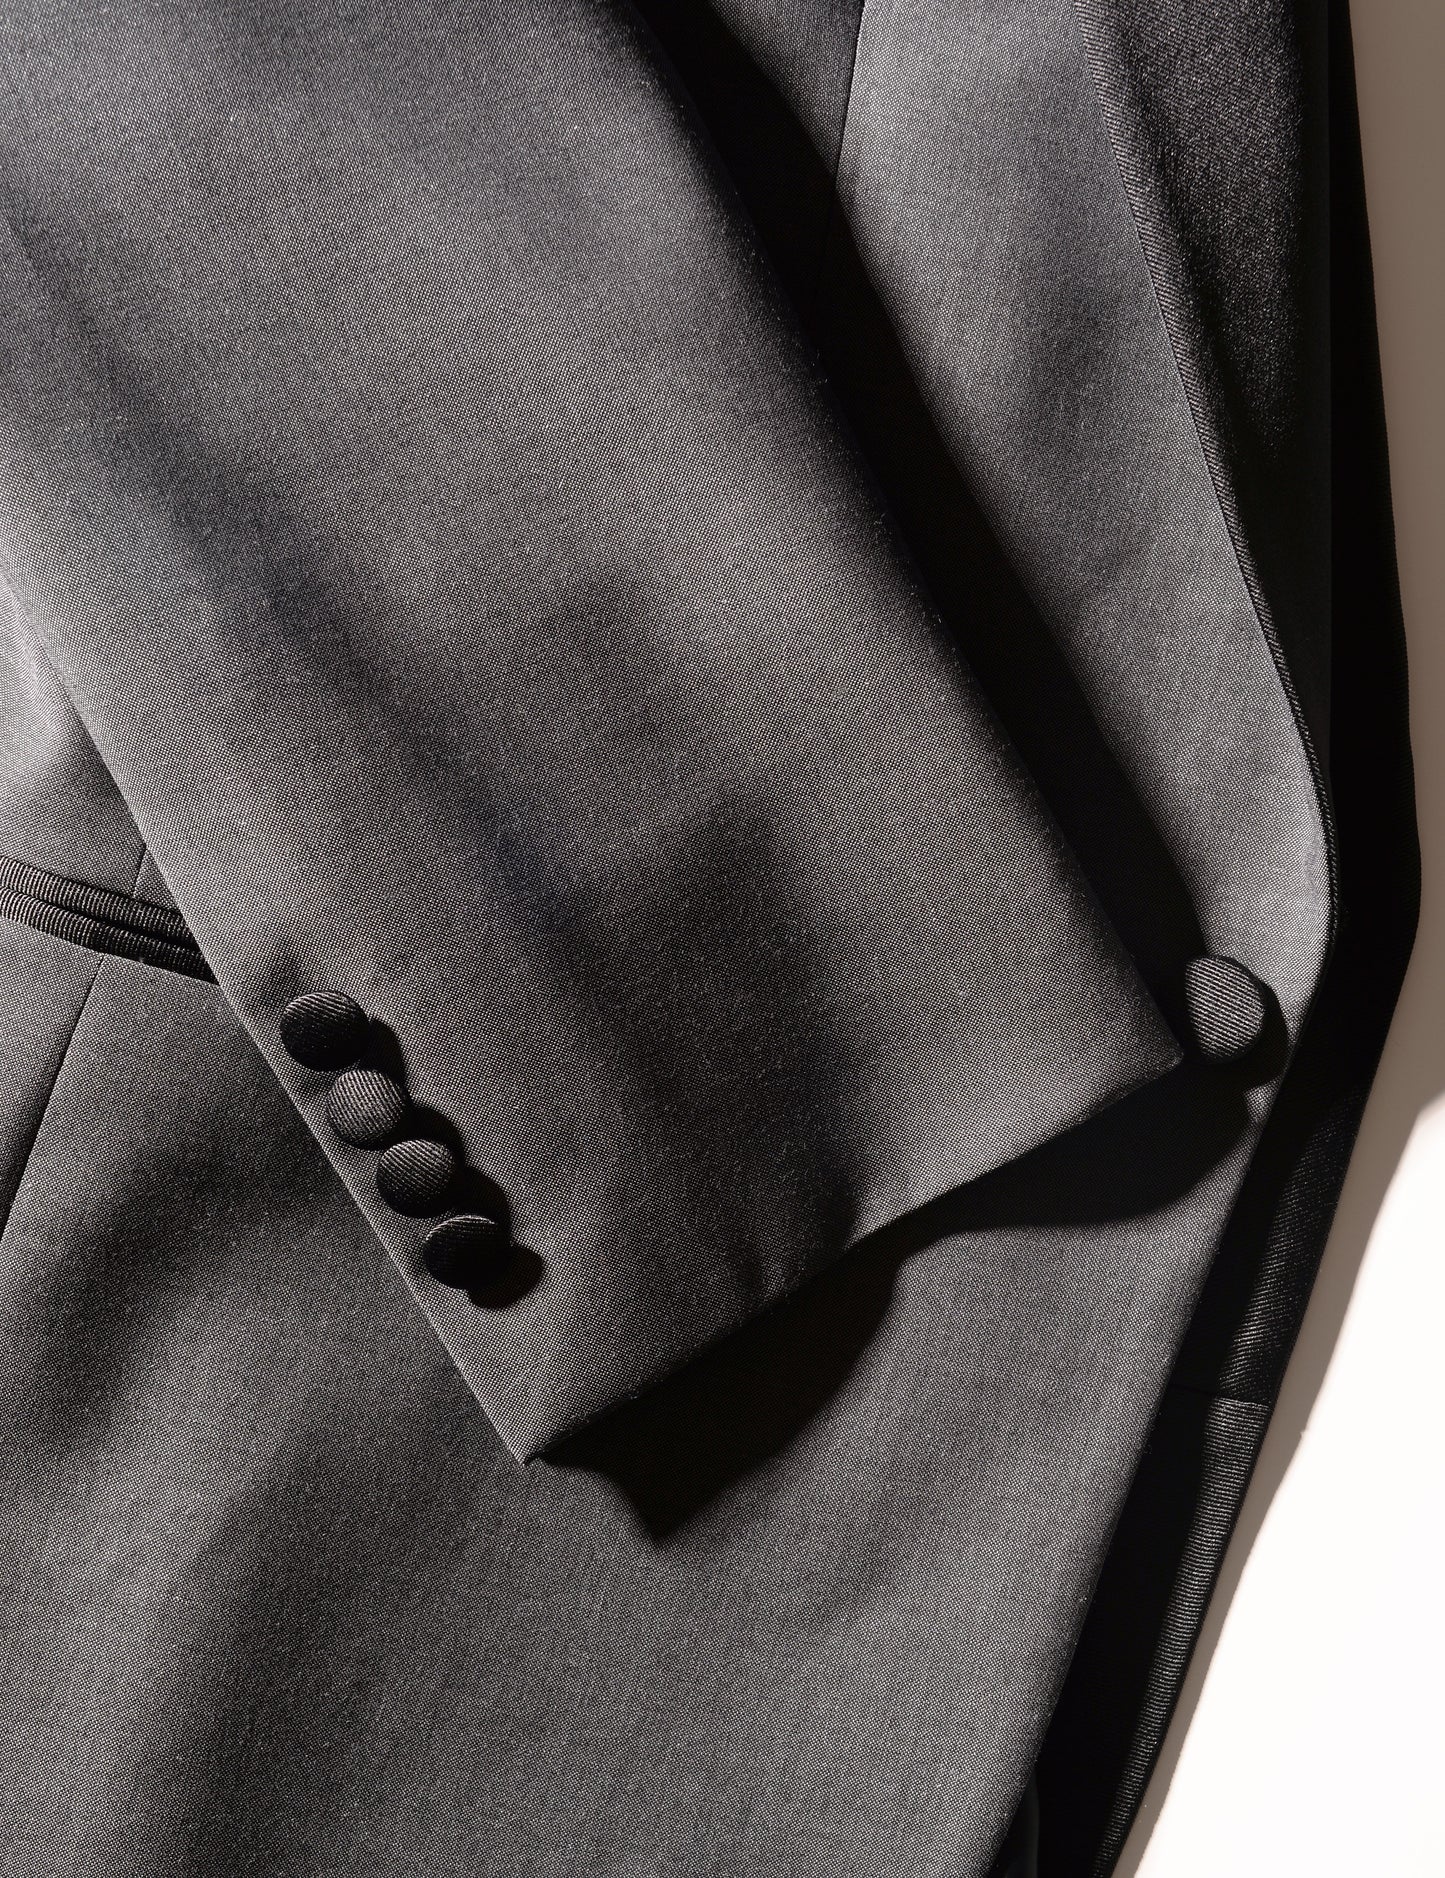 Detail shot of Brooklyn Tailors BKT50 Shawl Collar Dinner Jacket in Wool & Mohair - Gunmetal Gray showing sleeve with covered buttons